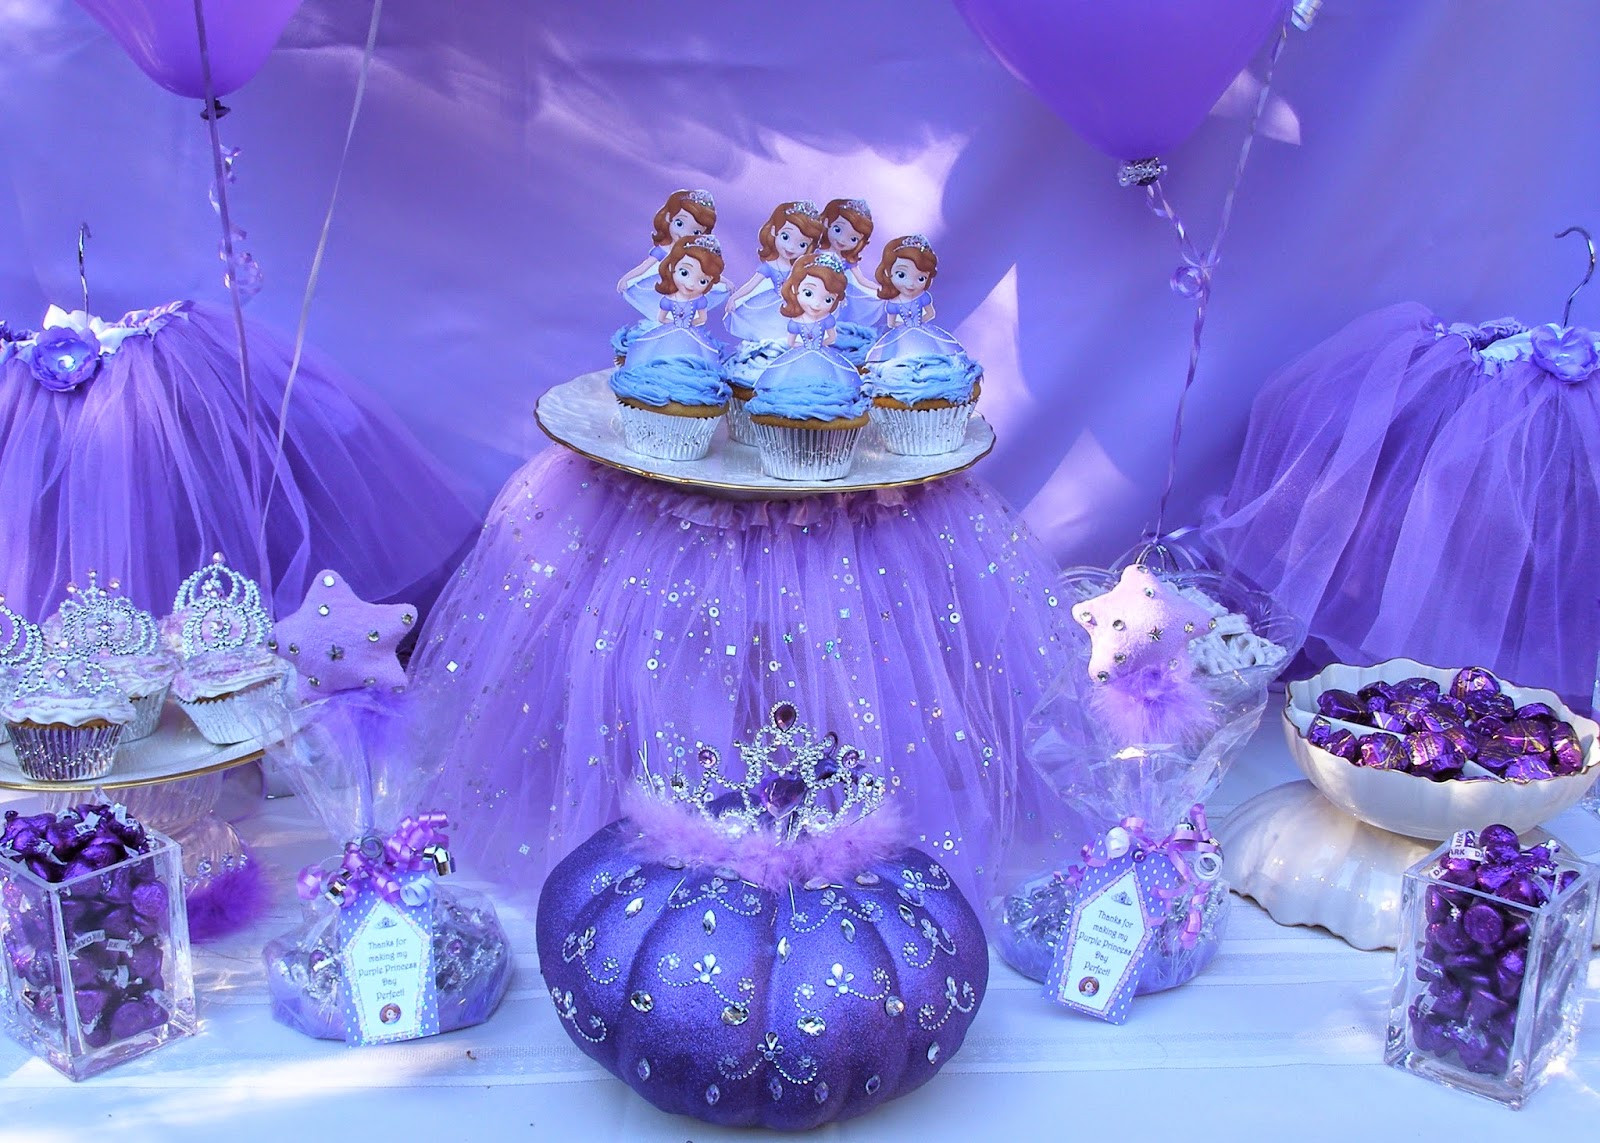 Decoration Ideas Purple Birthday Party
 The Princess Birthday Blog Introducing Our New Little